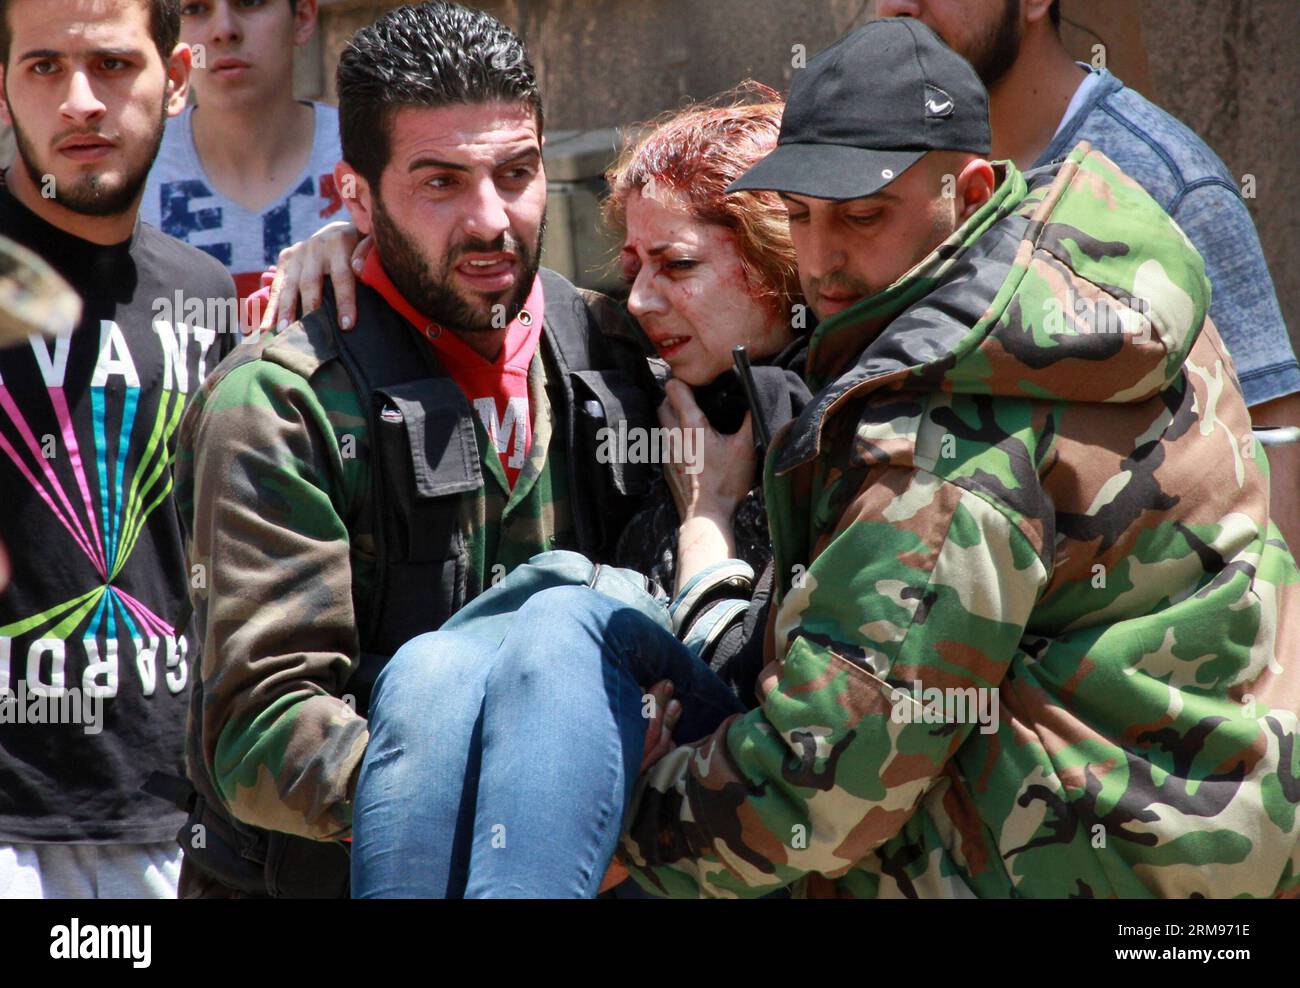 (140510) -- HOMS, May 10, 2014 (Xinhua) -- People transfer a woman, who was injured by a mine that went off in Bustan al-Diwan neighborhood in the old city of Homs, Syria, on Saturday, May 10, 2014. According to media reports, three people were injured by the blast. The Governor of Syria s central province of Homs Talal Barazi on Friday declared the old city of Homs safe and empty of arms and armed rebels, following the evacuation of the last batch of rebels there, the official SANA News Agency. (Xinhua/ Bassem Tellawi)(bxq) SYRIA-HOMS-MINE BLAST PUBLICATIONxNOTxINxCHN   Homs May 10 2014 XINHU Stock Photo